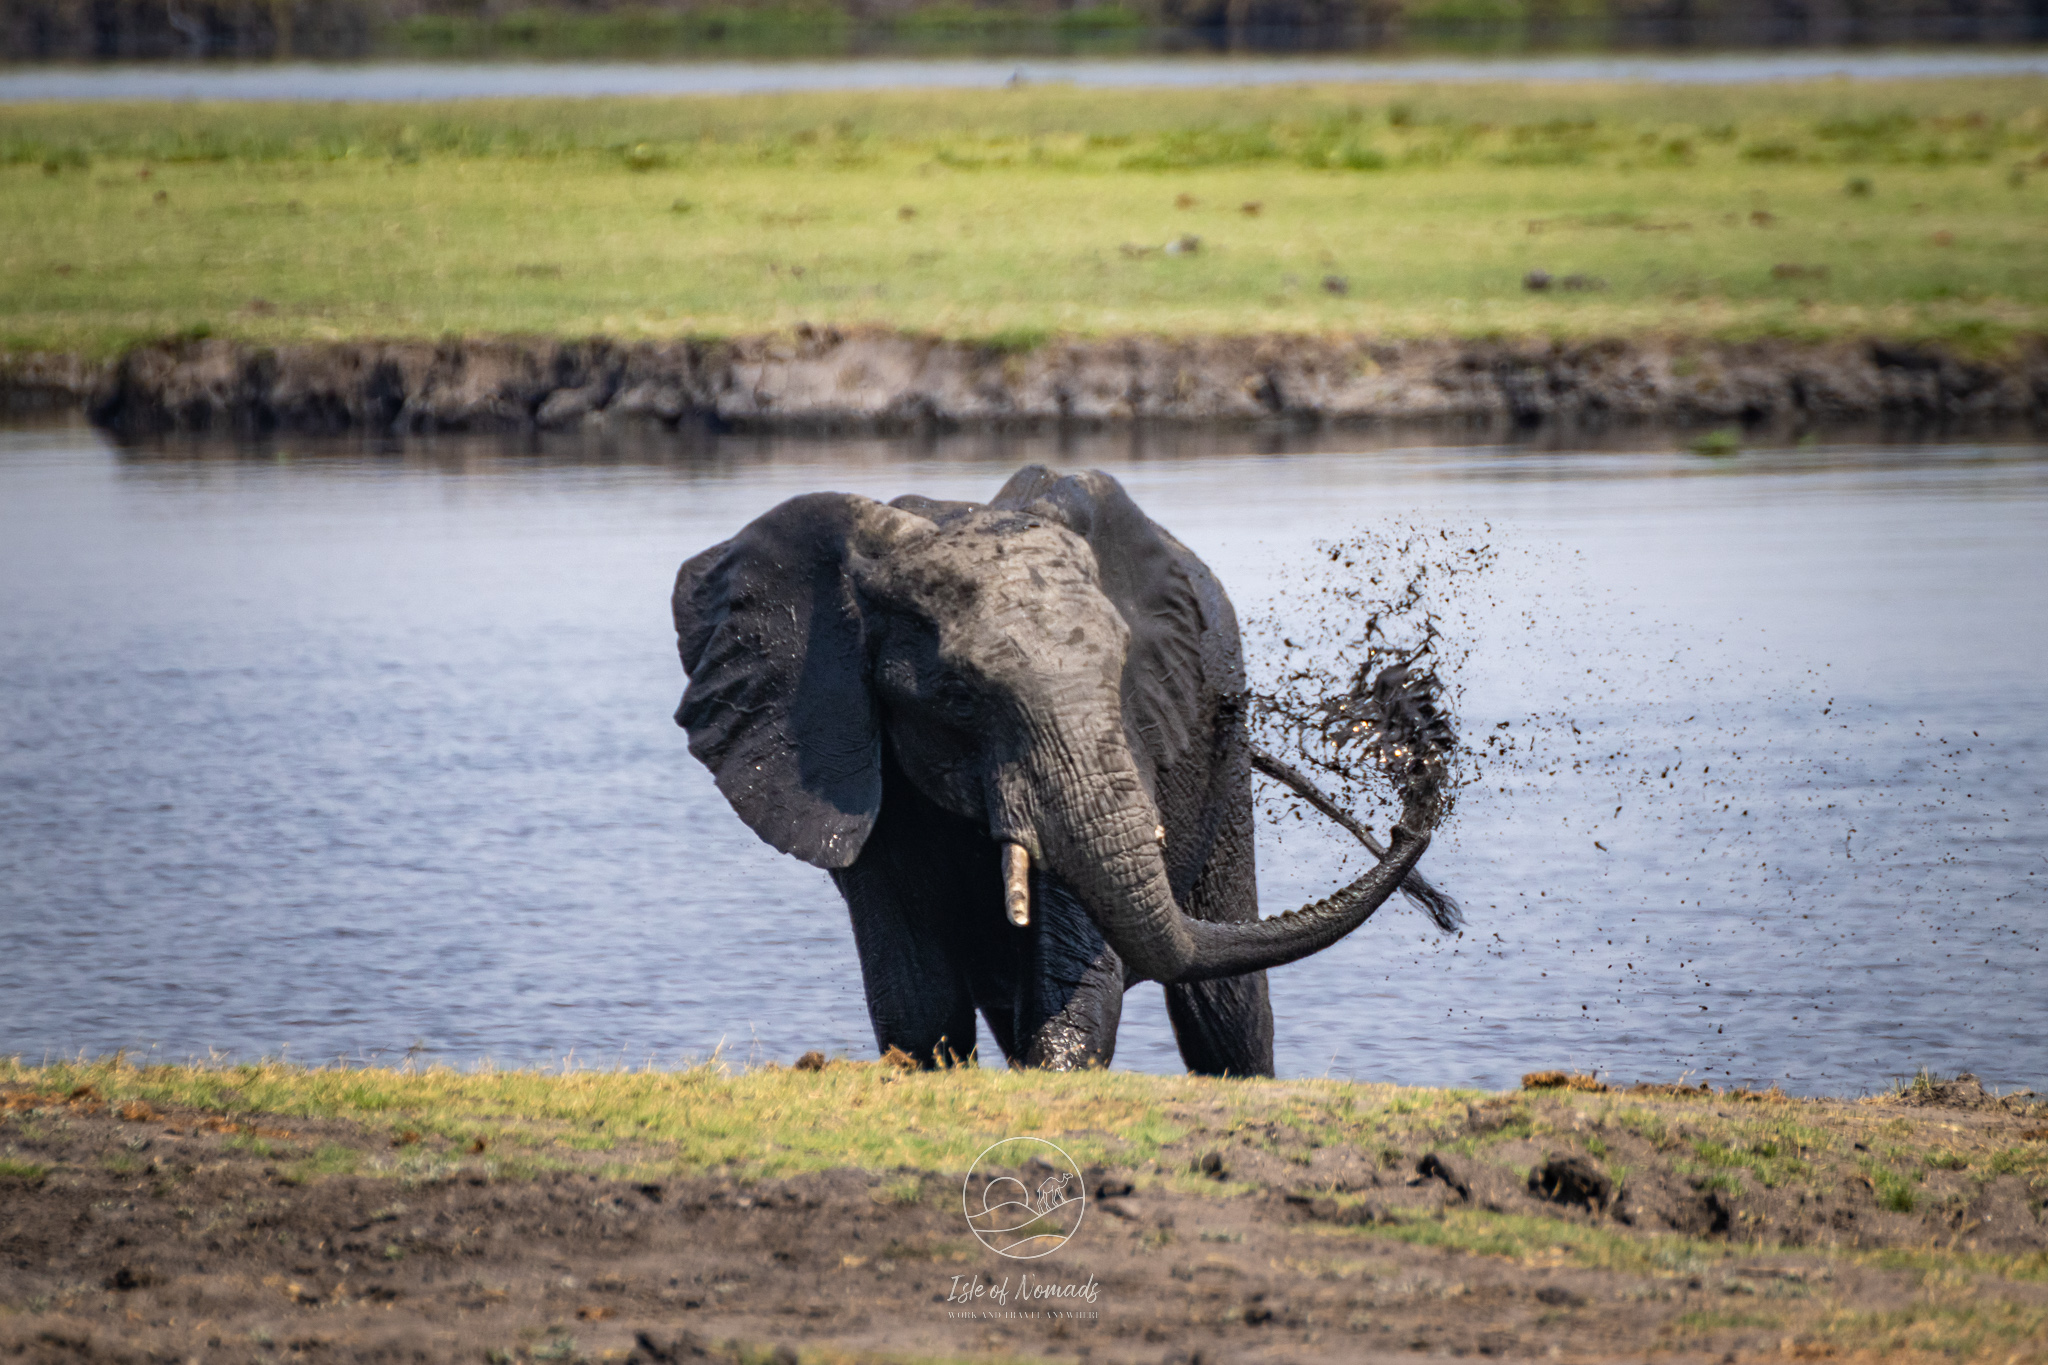 Floating down the Chobe river and watching elephants play in the mud was unforgettable